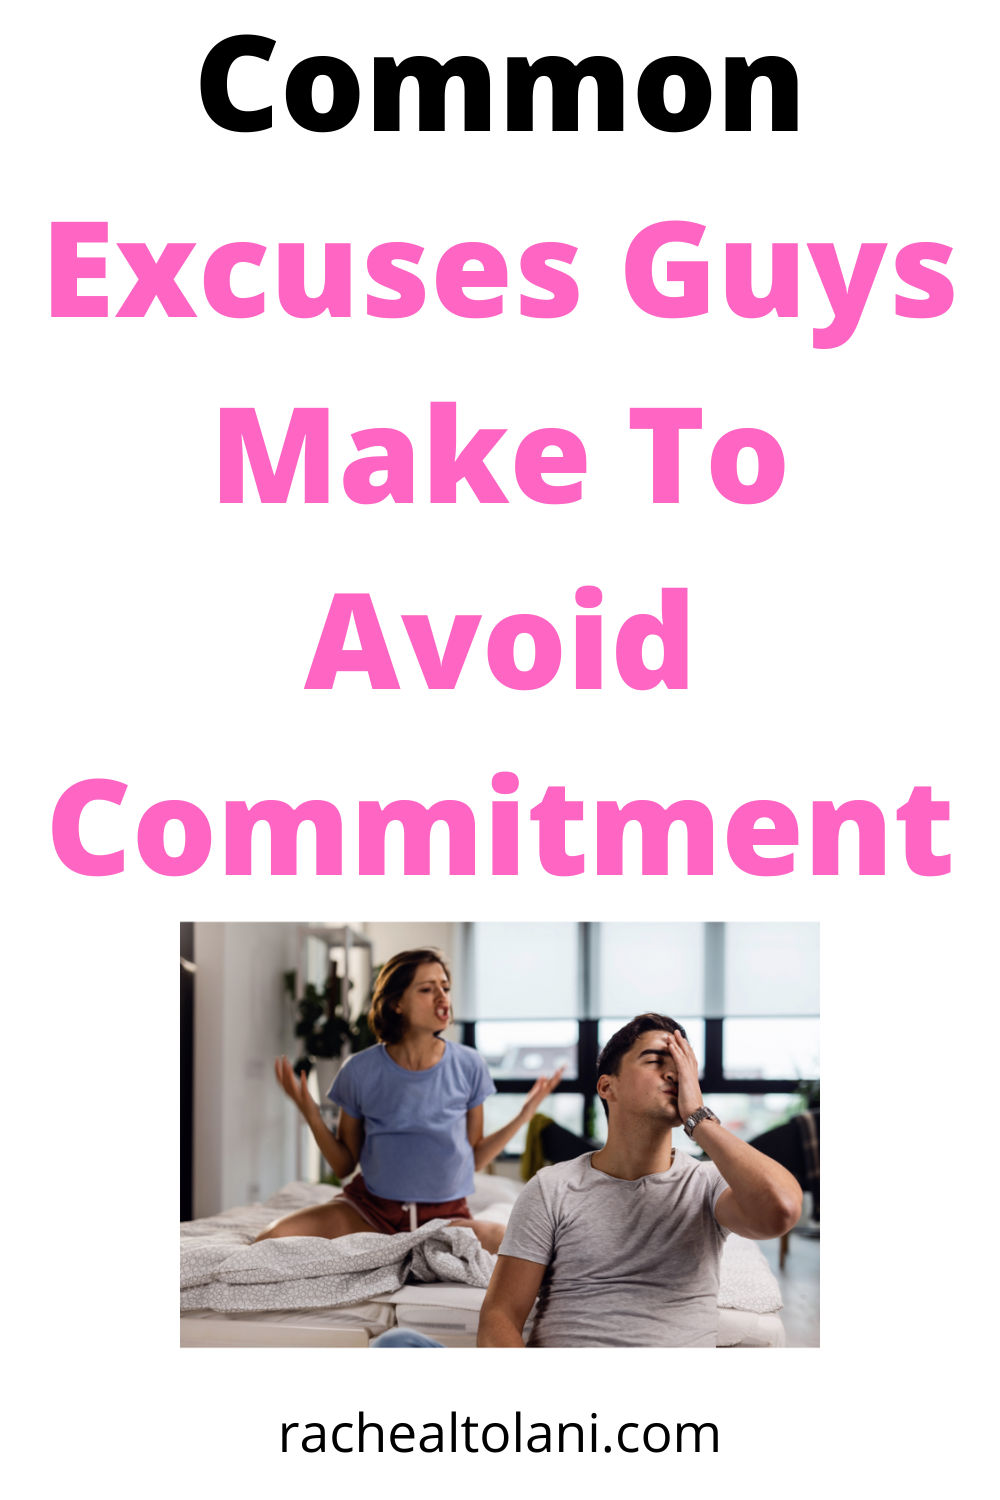 Excuses guys make to avoid commitment